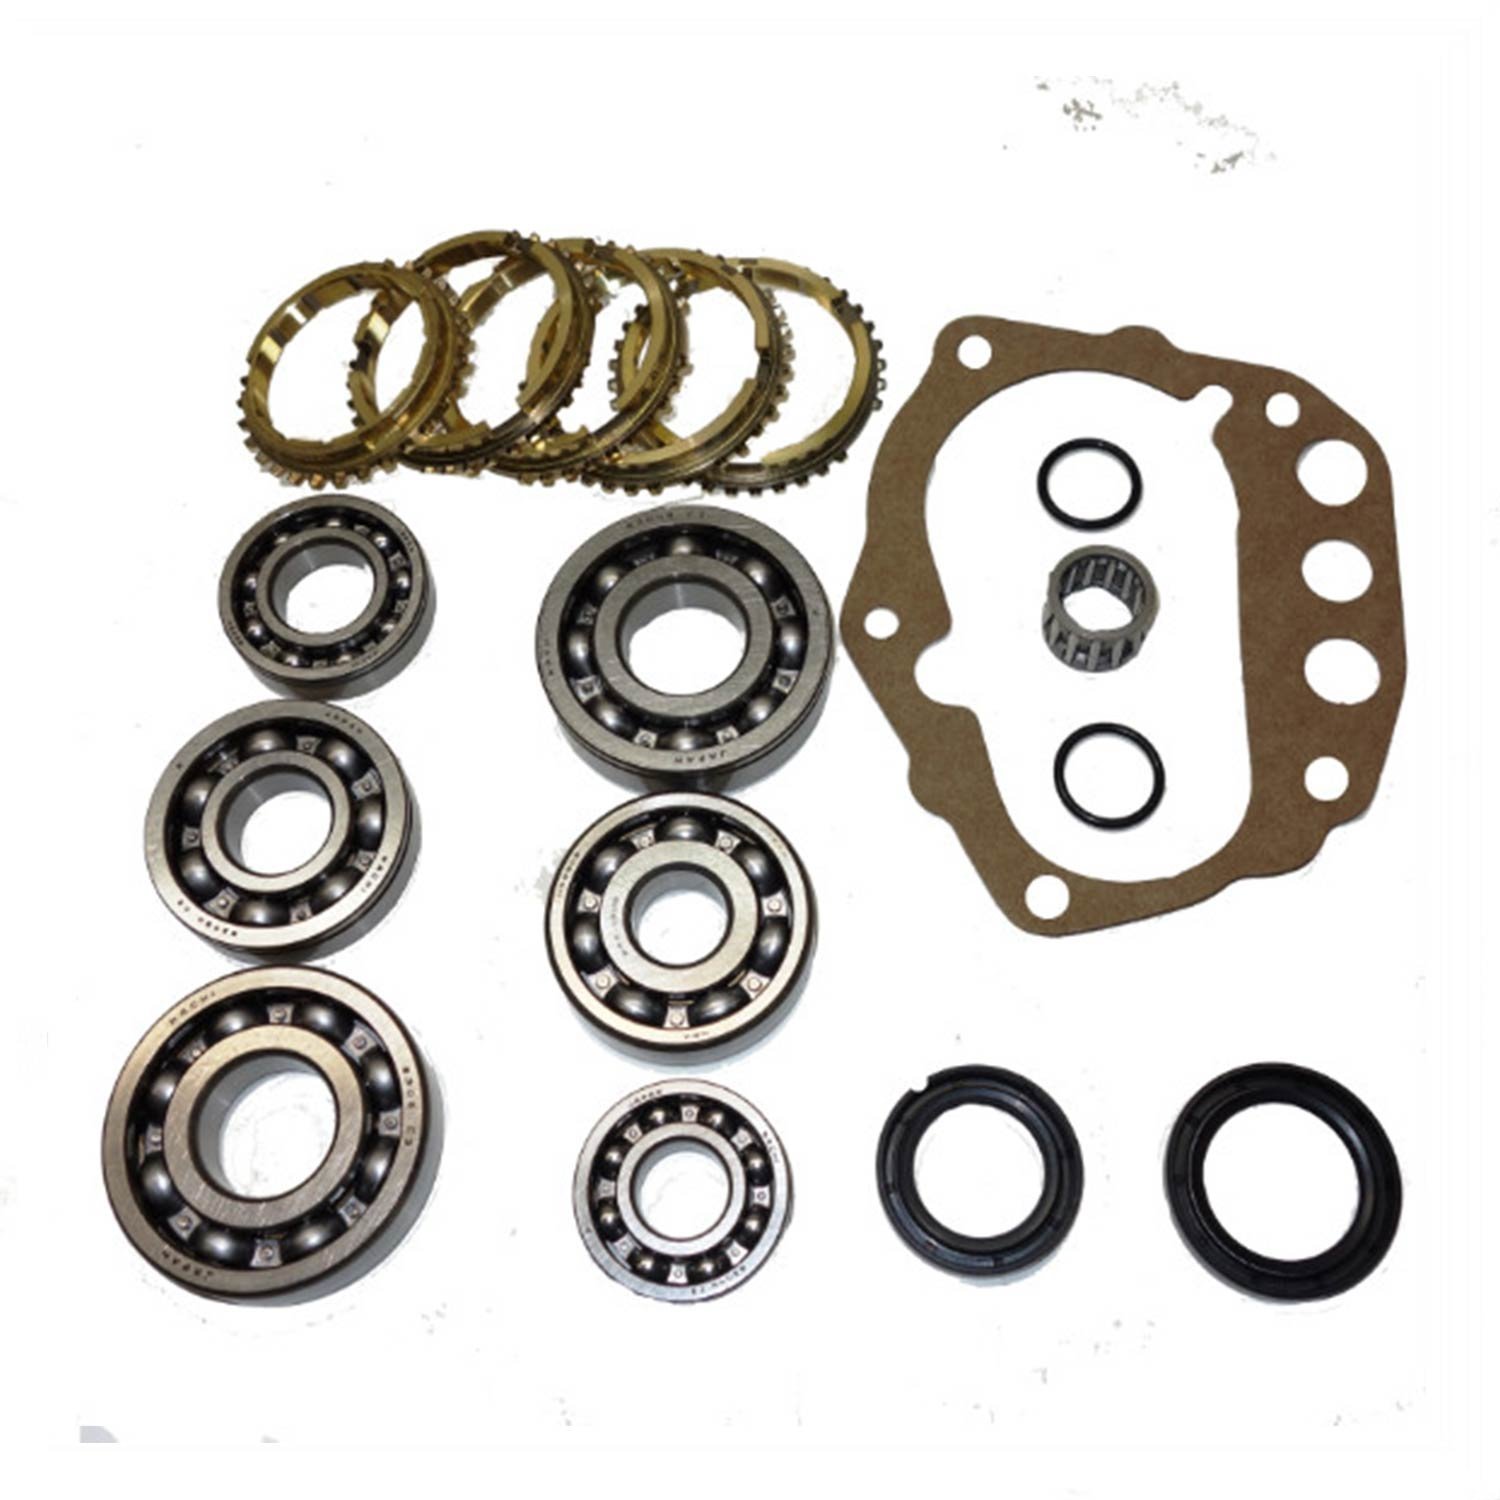 USA Standard 73995 Manual Transmission Bearing Kit, 1998+ Frontier 4-Cyl 2Wd W/Synchros